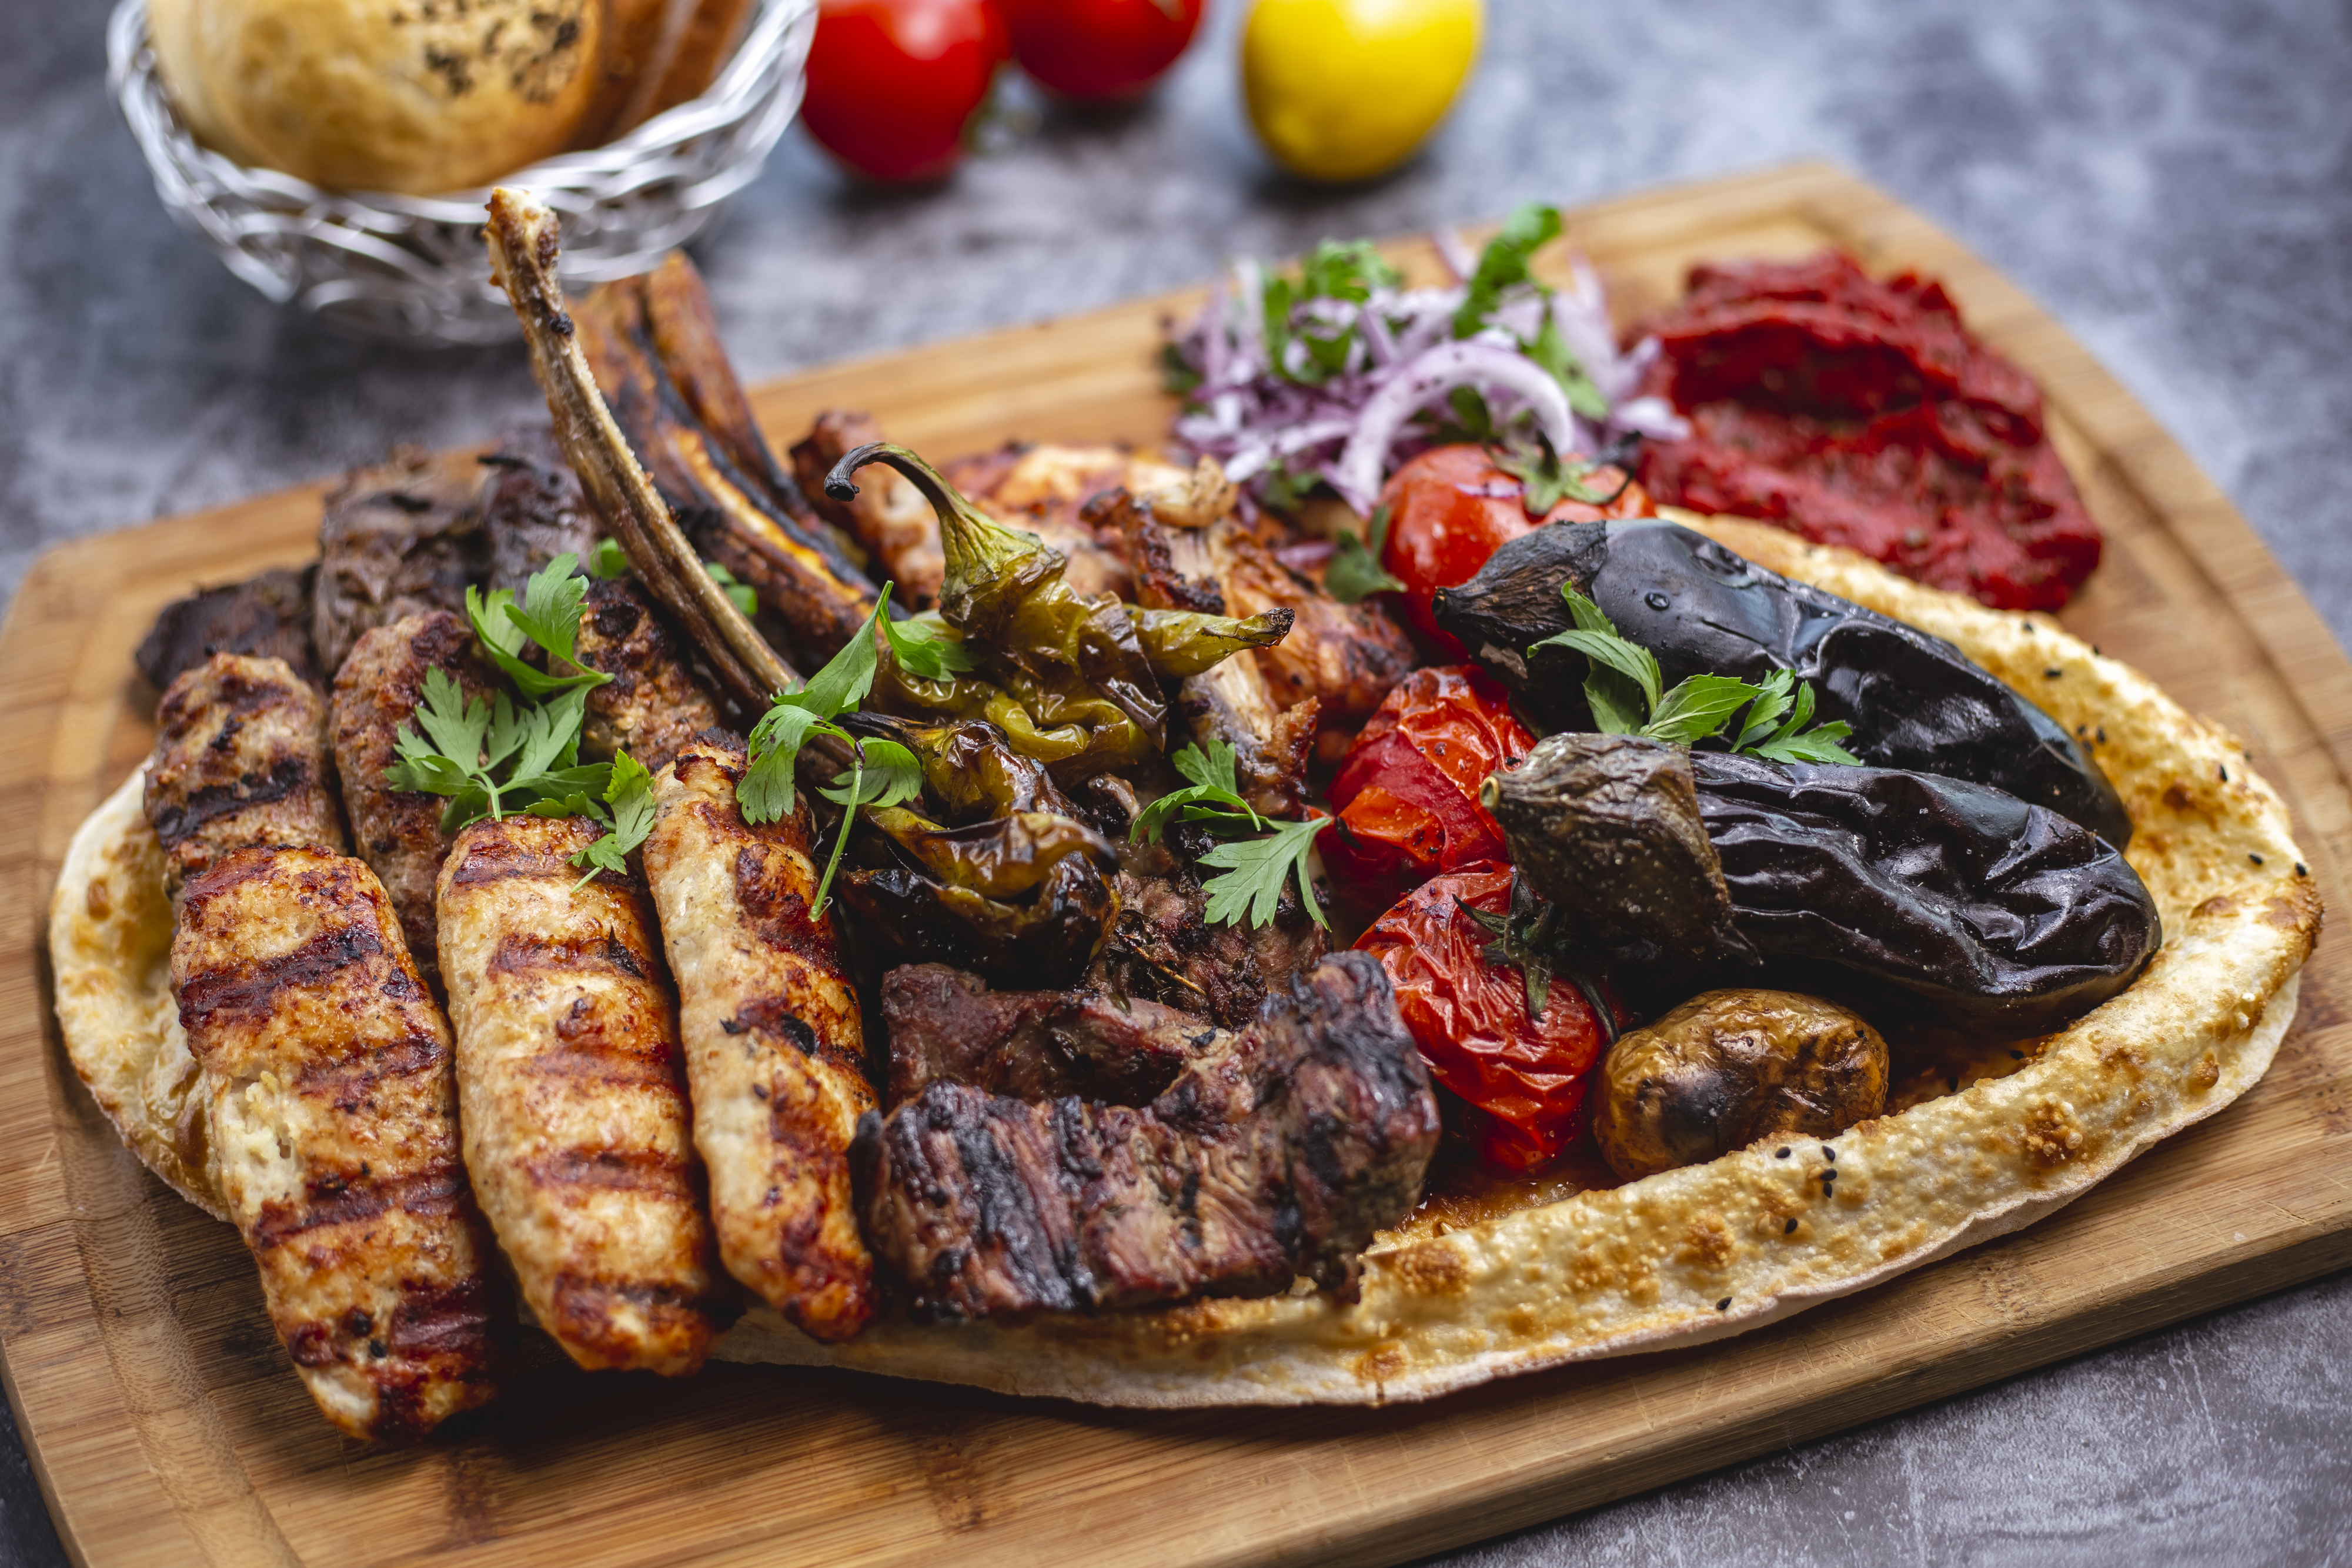 kebab-platter-with-lamb-chicken-lula-tikka-kebabs-grilled-vegetables-with-red-onion-salad